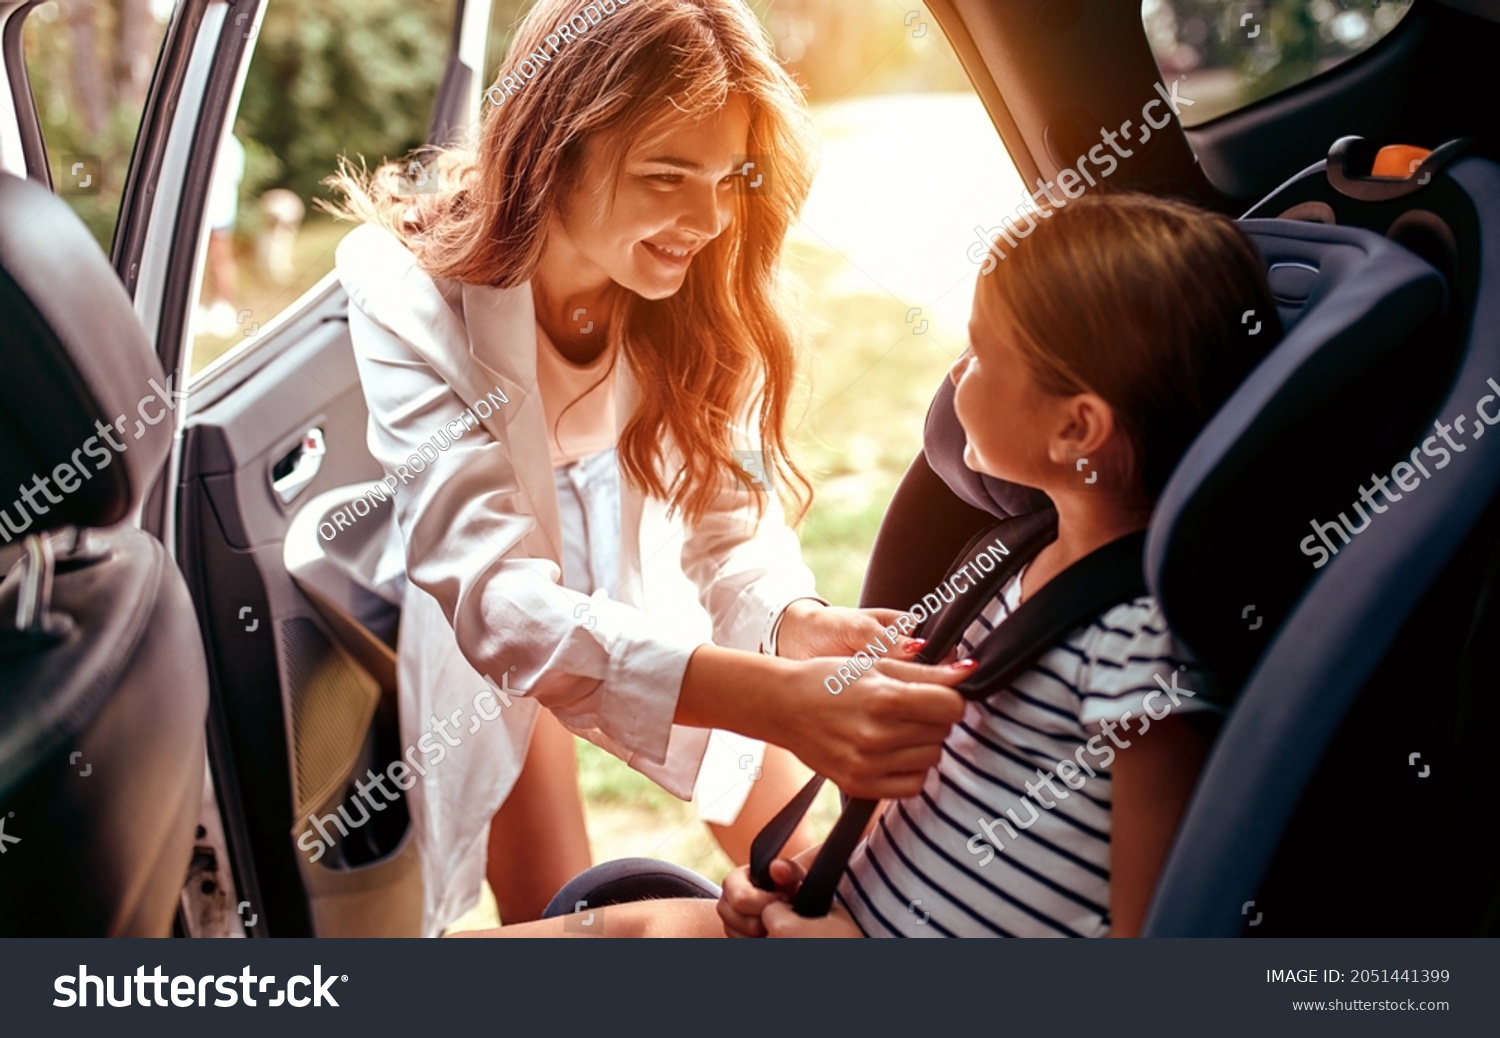 A cute woman mother put her daughter in a car seat and fastens her seat belts. Protection during the trip in the car. #2051441399